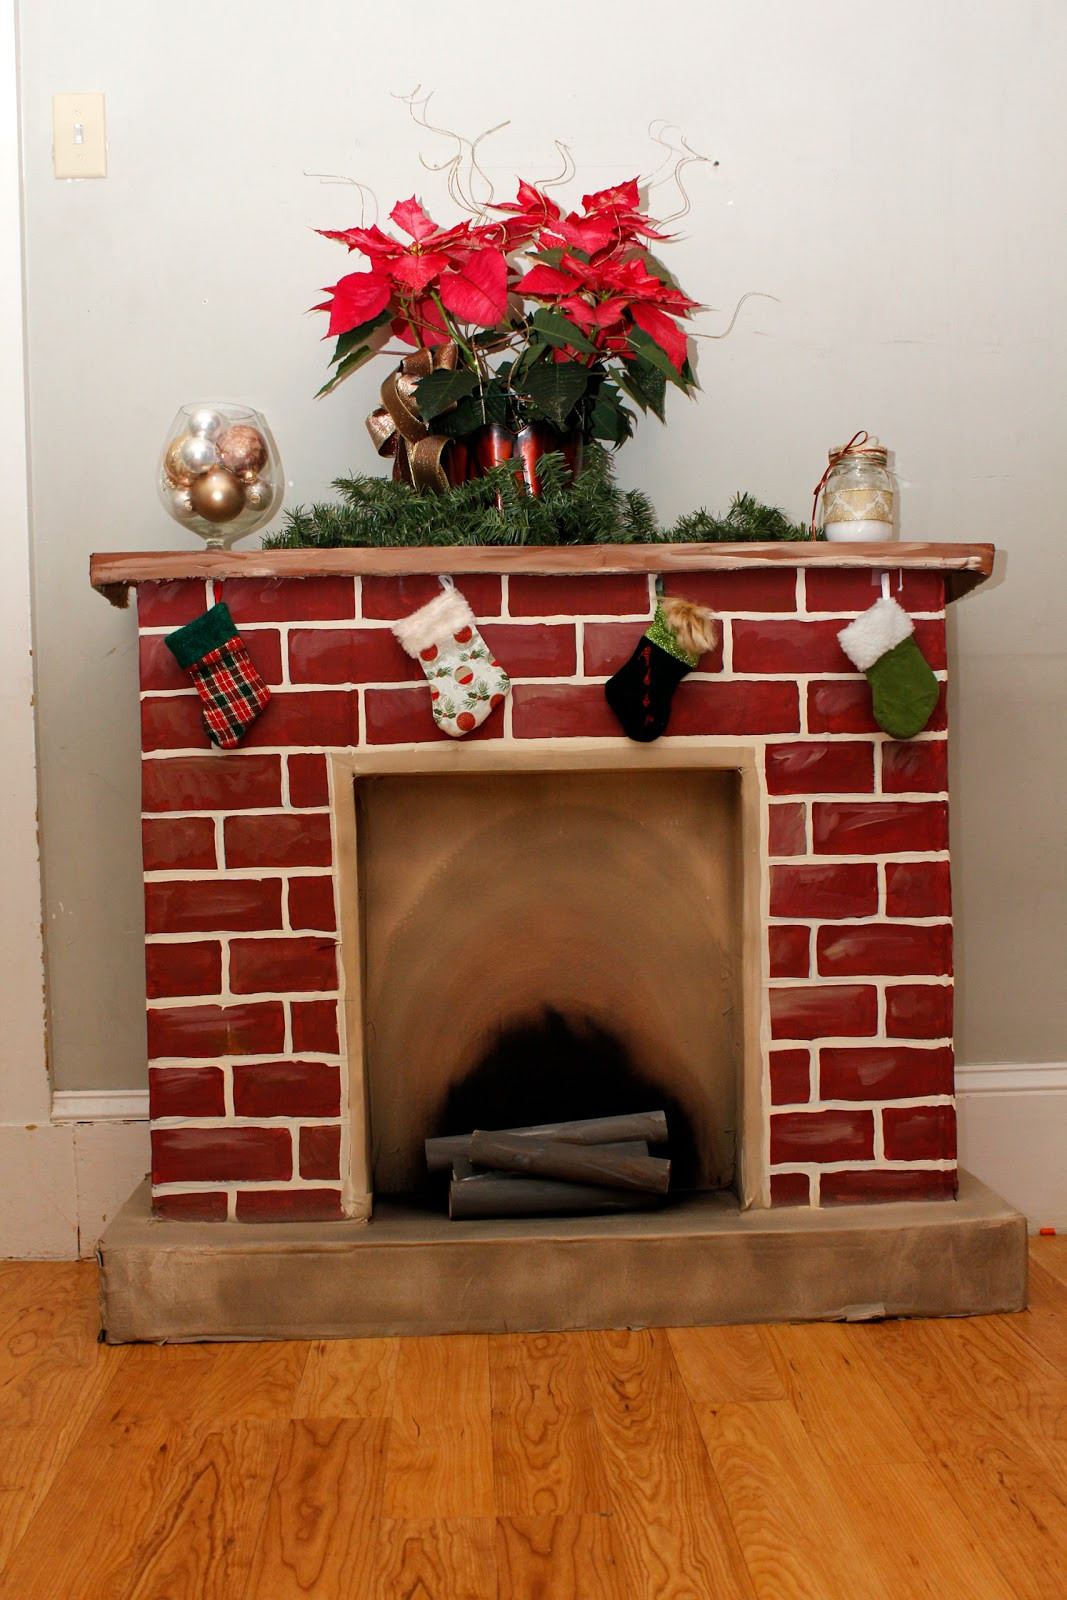 Cardboard Fireplace For Christmas
 365 Days to Simplicity Chestnuts roasting on an cardboard